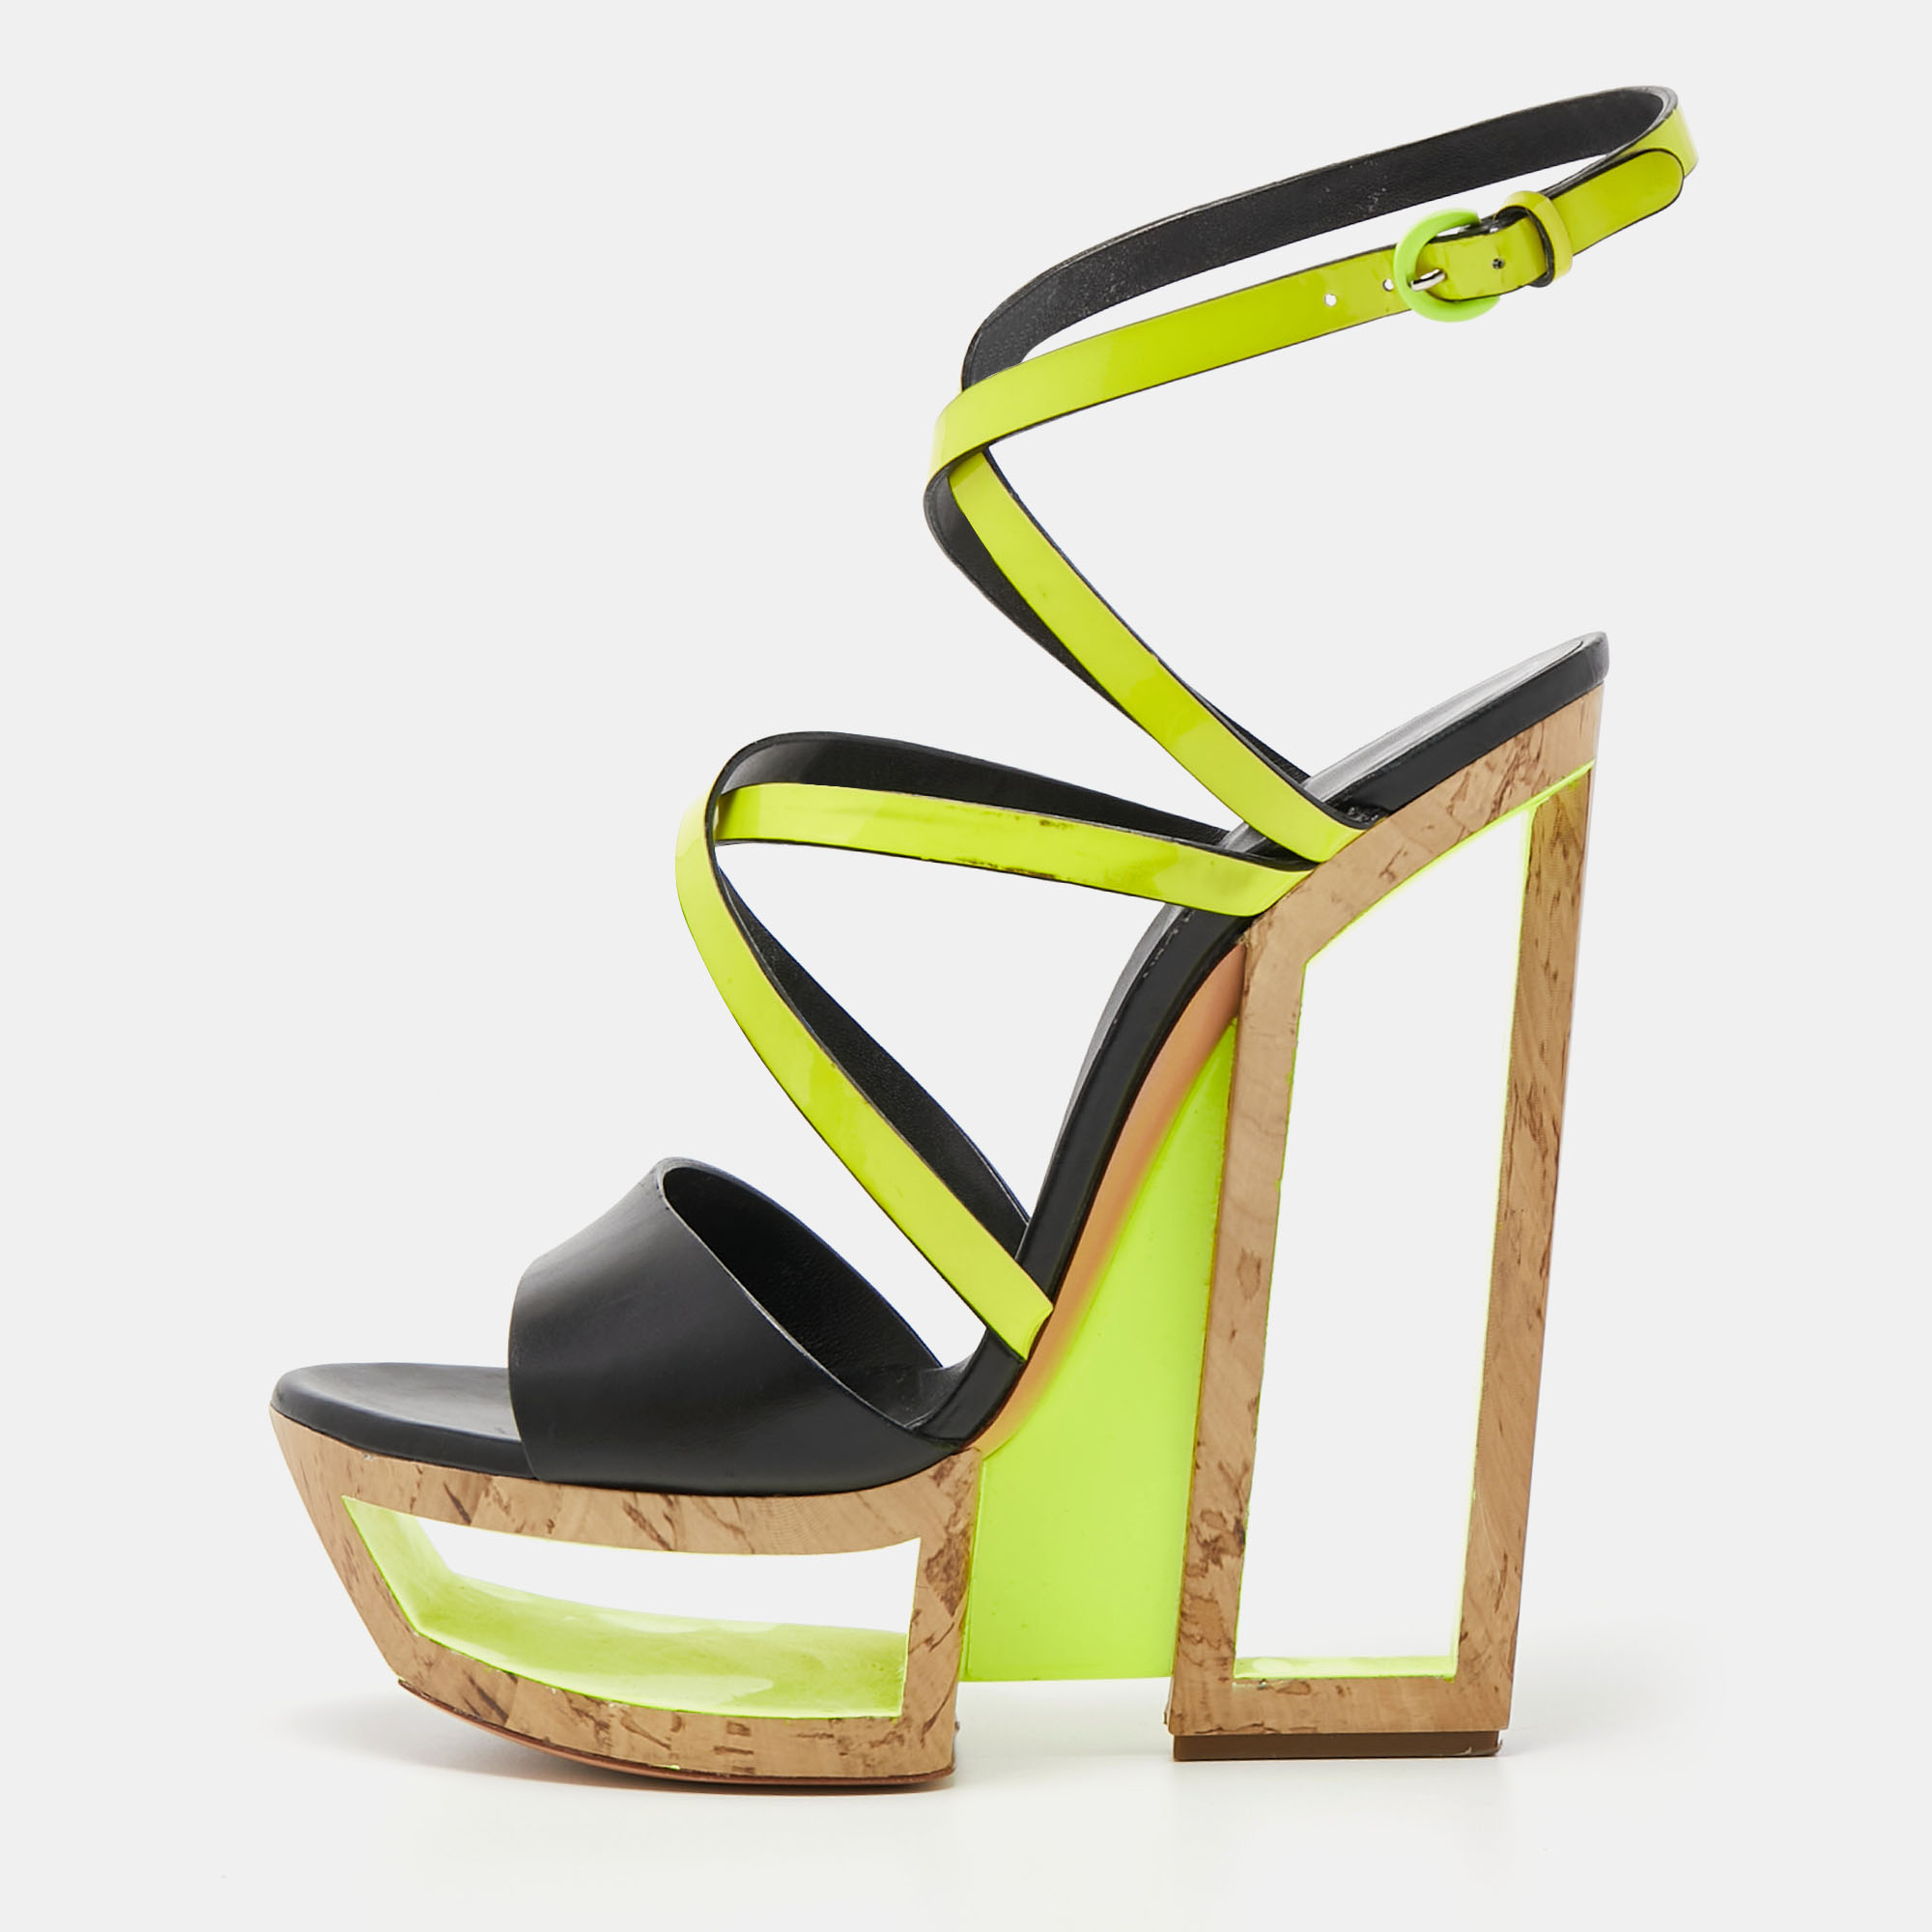 Perfectly sewn and finished to ensure an elegant look and fit these Casadei sandals are a purchase youll love flaunting. They look great on the feet.